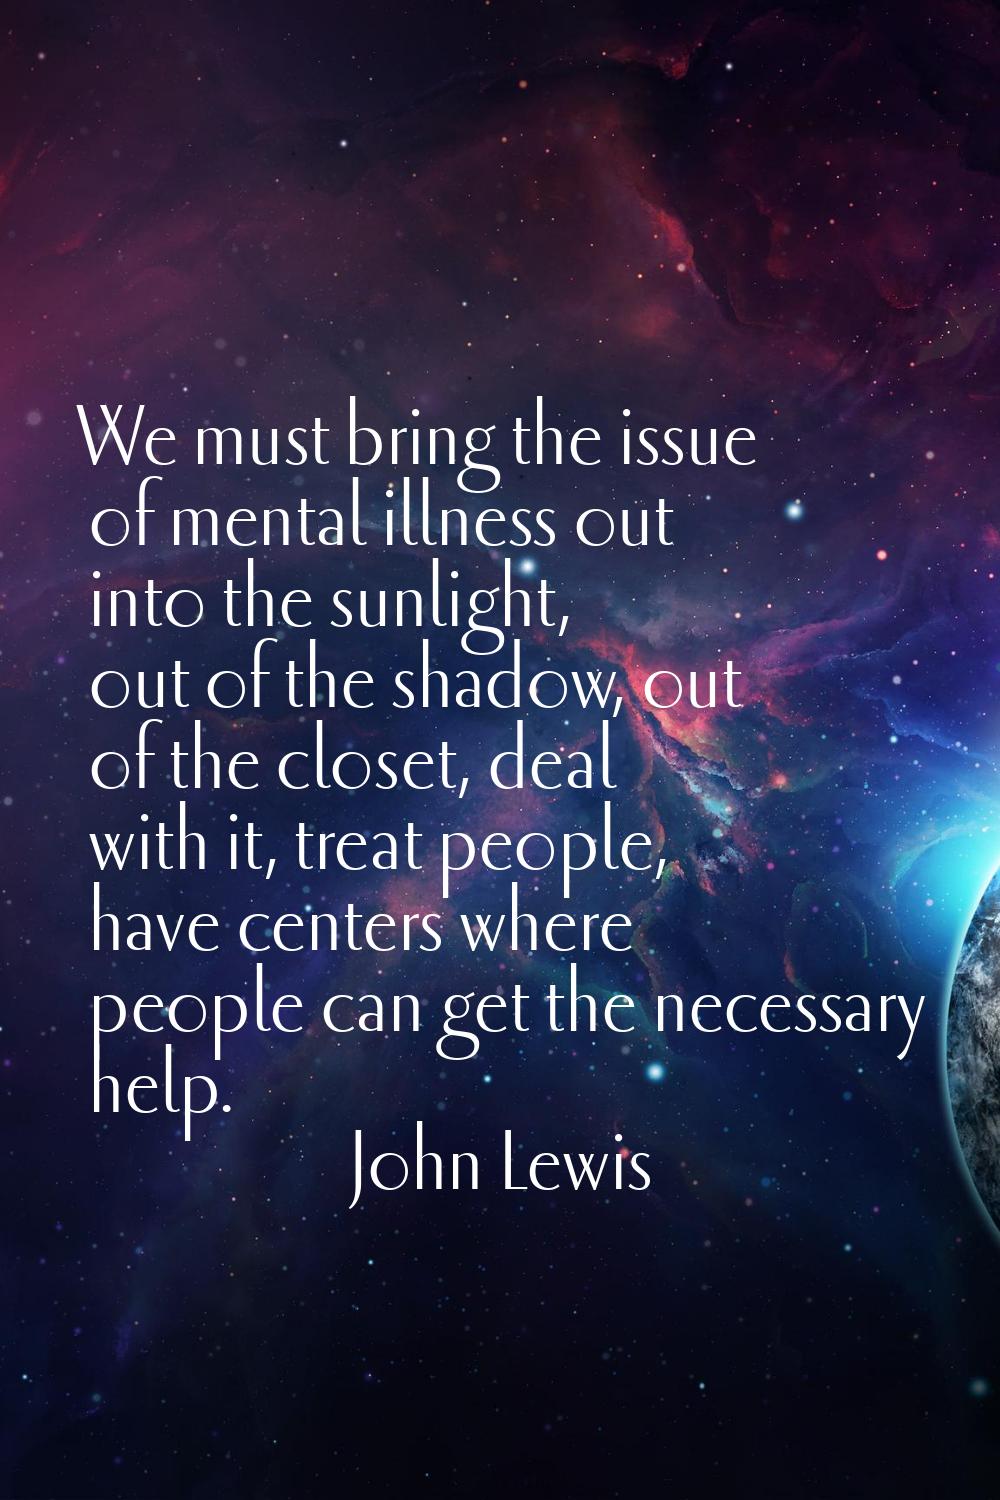 We must bring the issue of mental illness out into the sunlight, out of the shadow, out of the clos